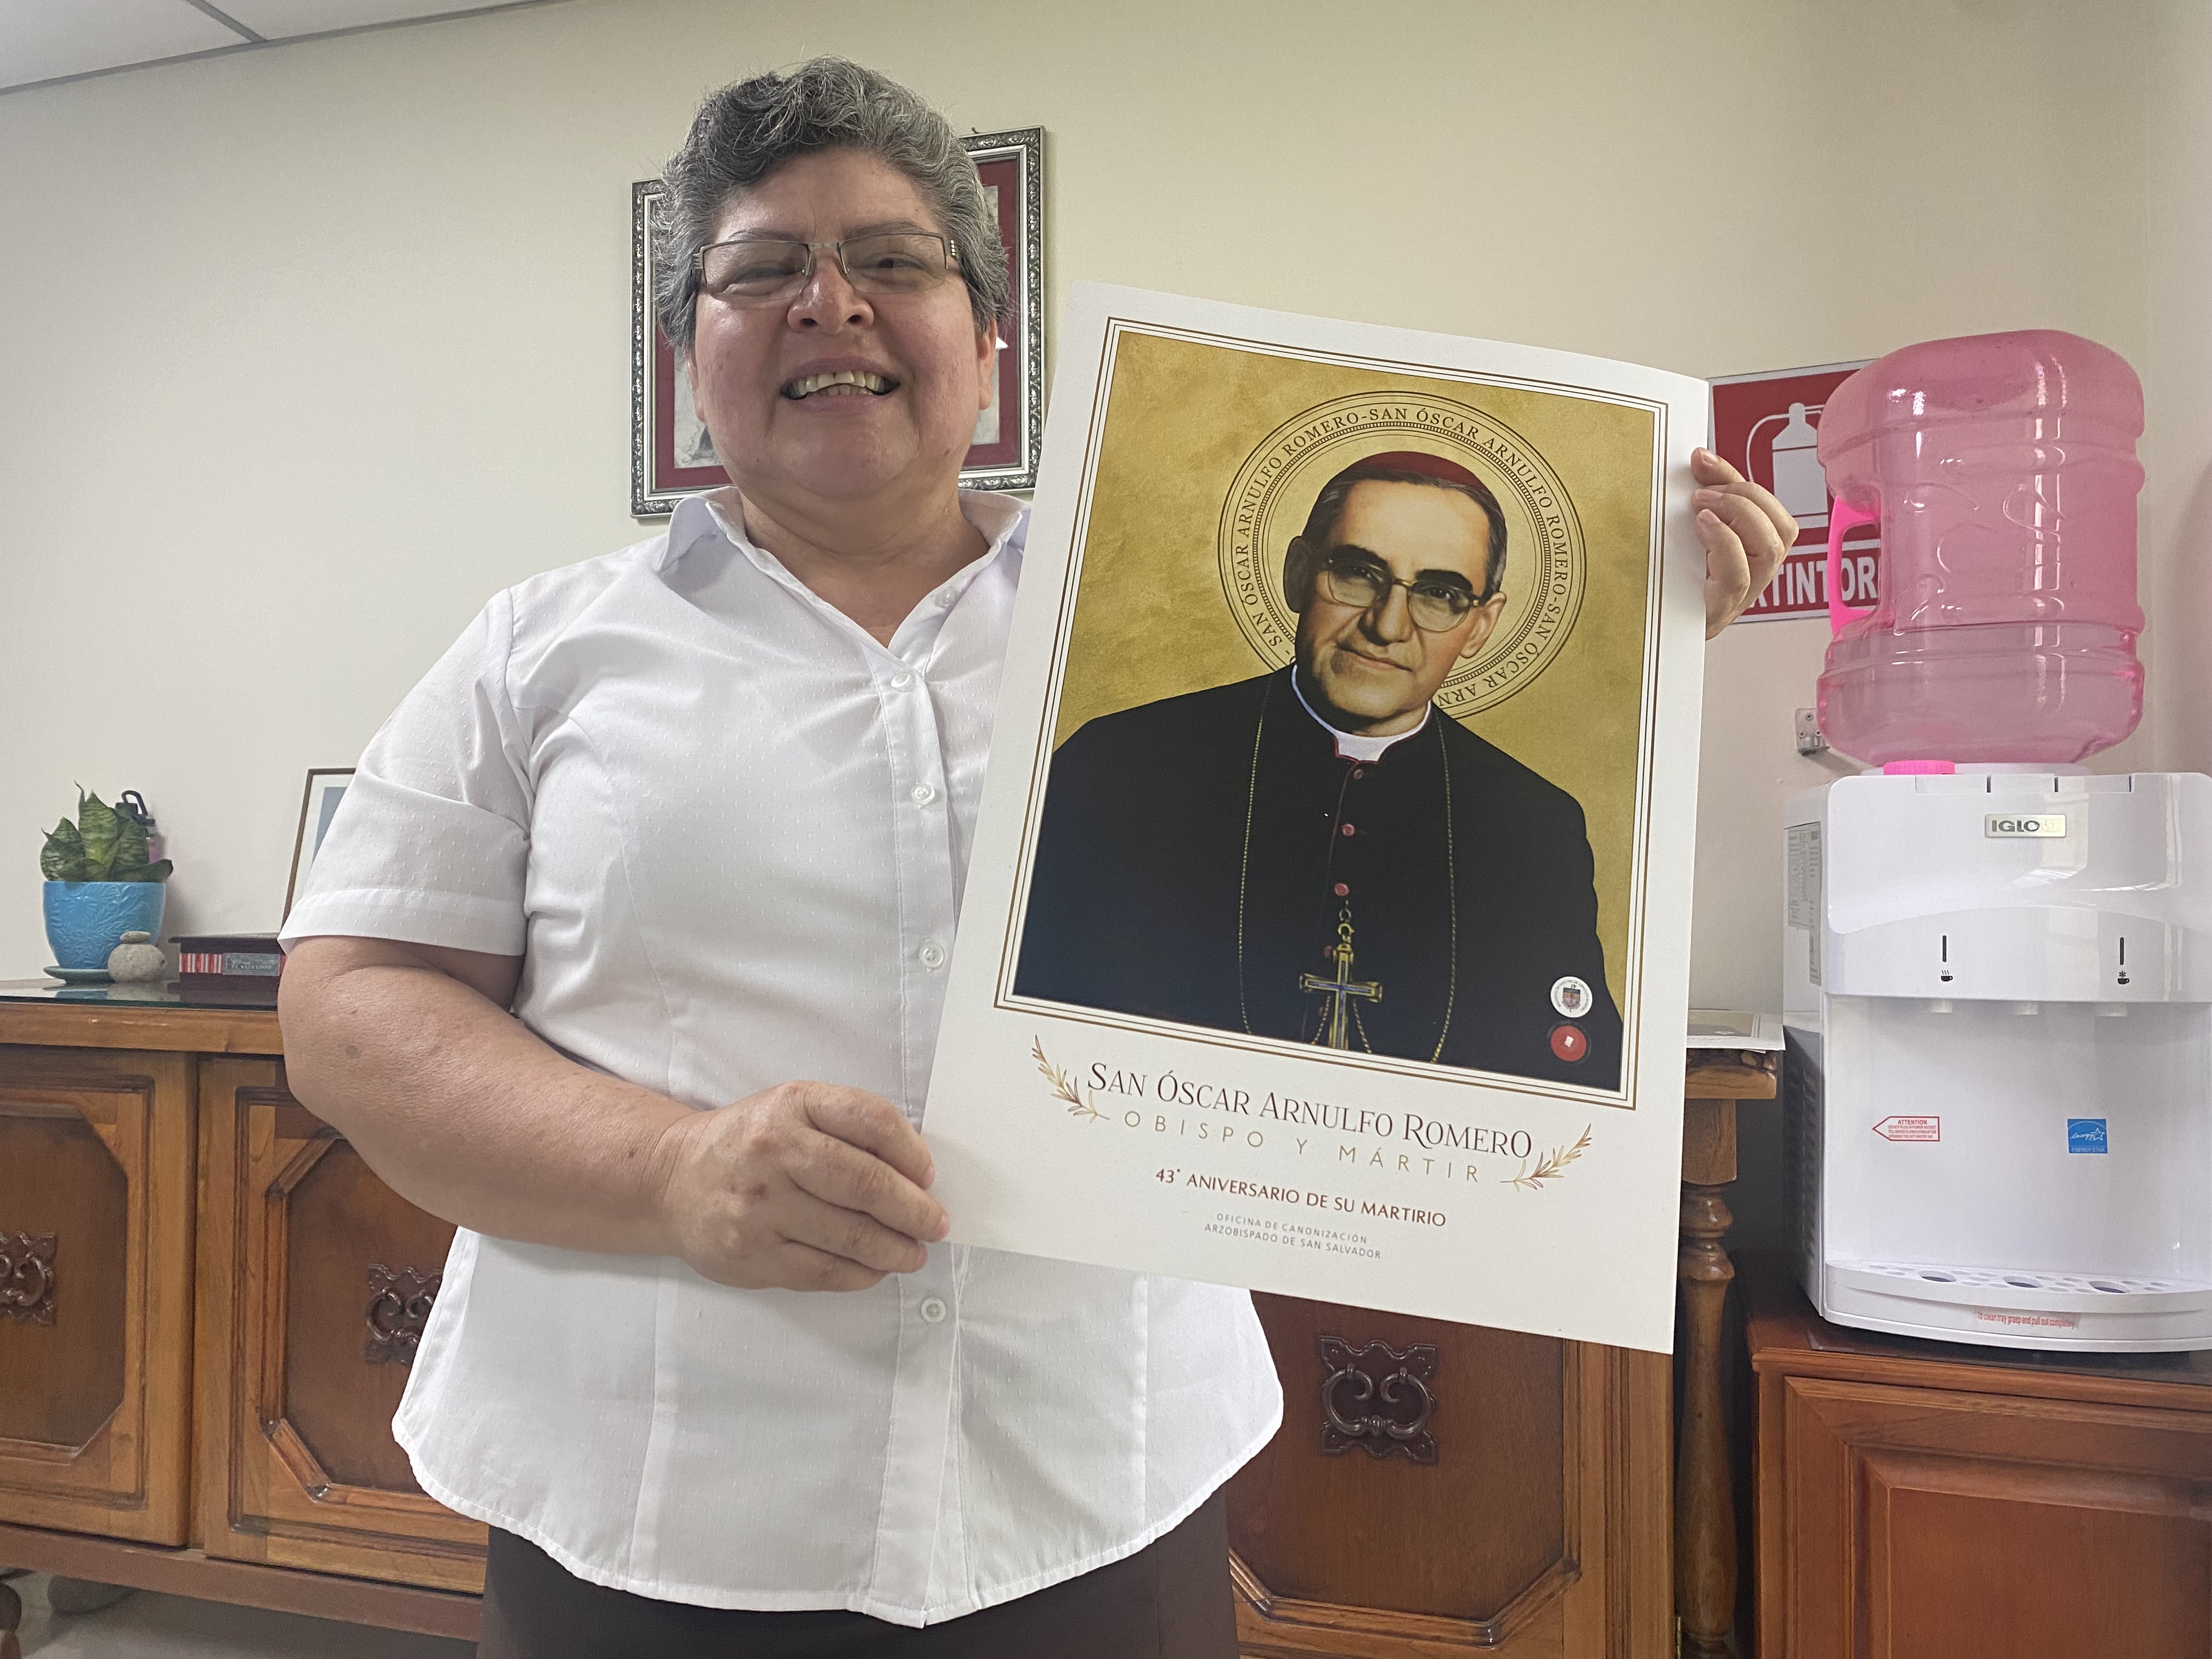 Sr. Tránsito de la Cruz Valdez Crespín holds a poster of St. Oscar Romero March 24, in her office close to the chapel where he was martyred. Valdez is the superior of the Missionary Carmelites of St. Teresa, who care for the house the Salvadoran saint lived on the grounds of the hospital for poor cancer patients that the religious community still operates. (GSR photo/Rhina Guidos)